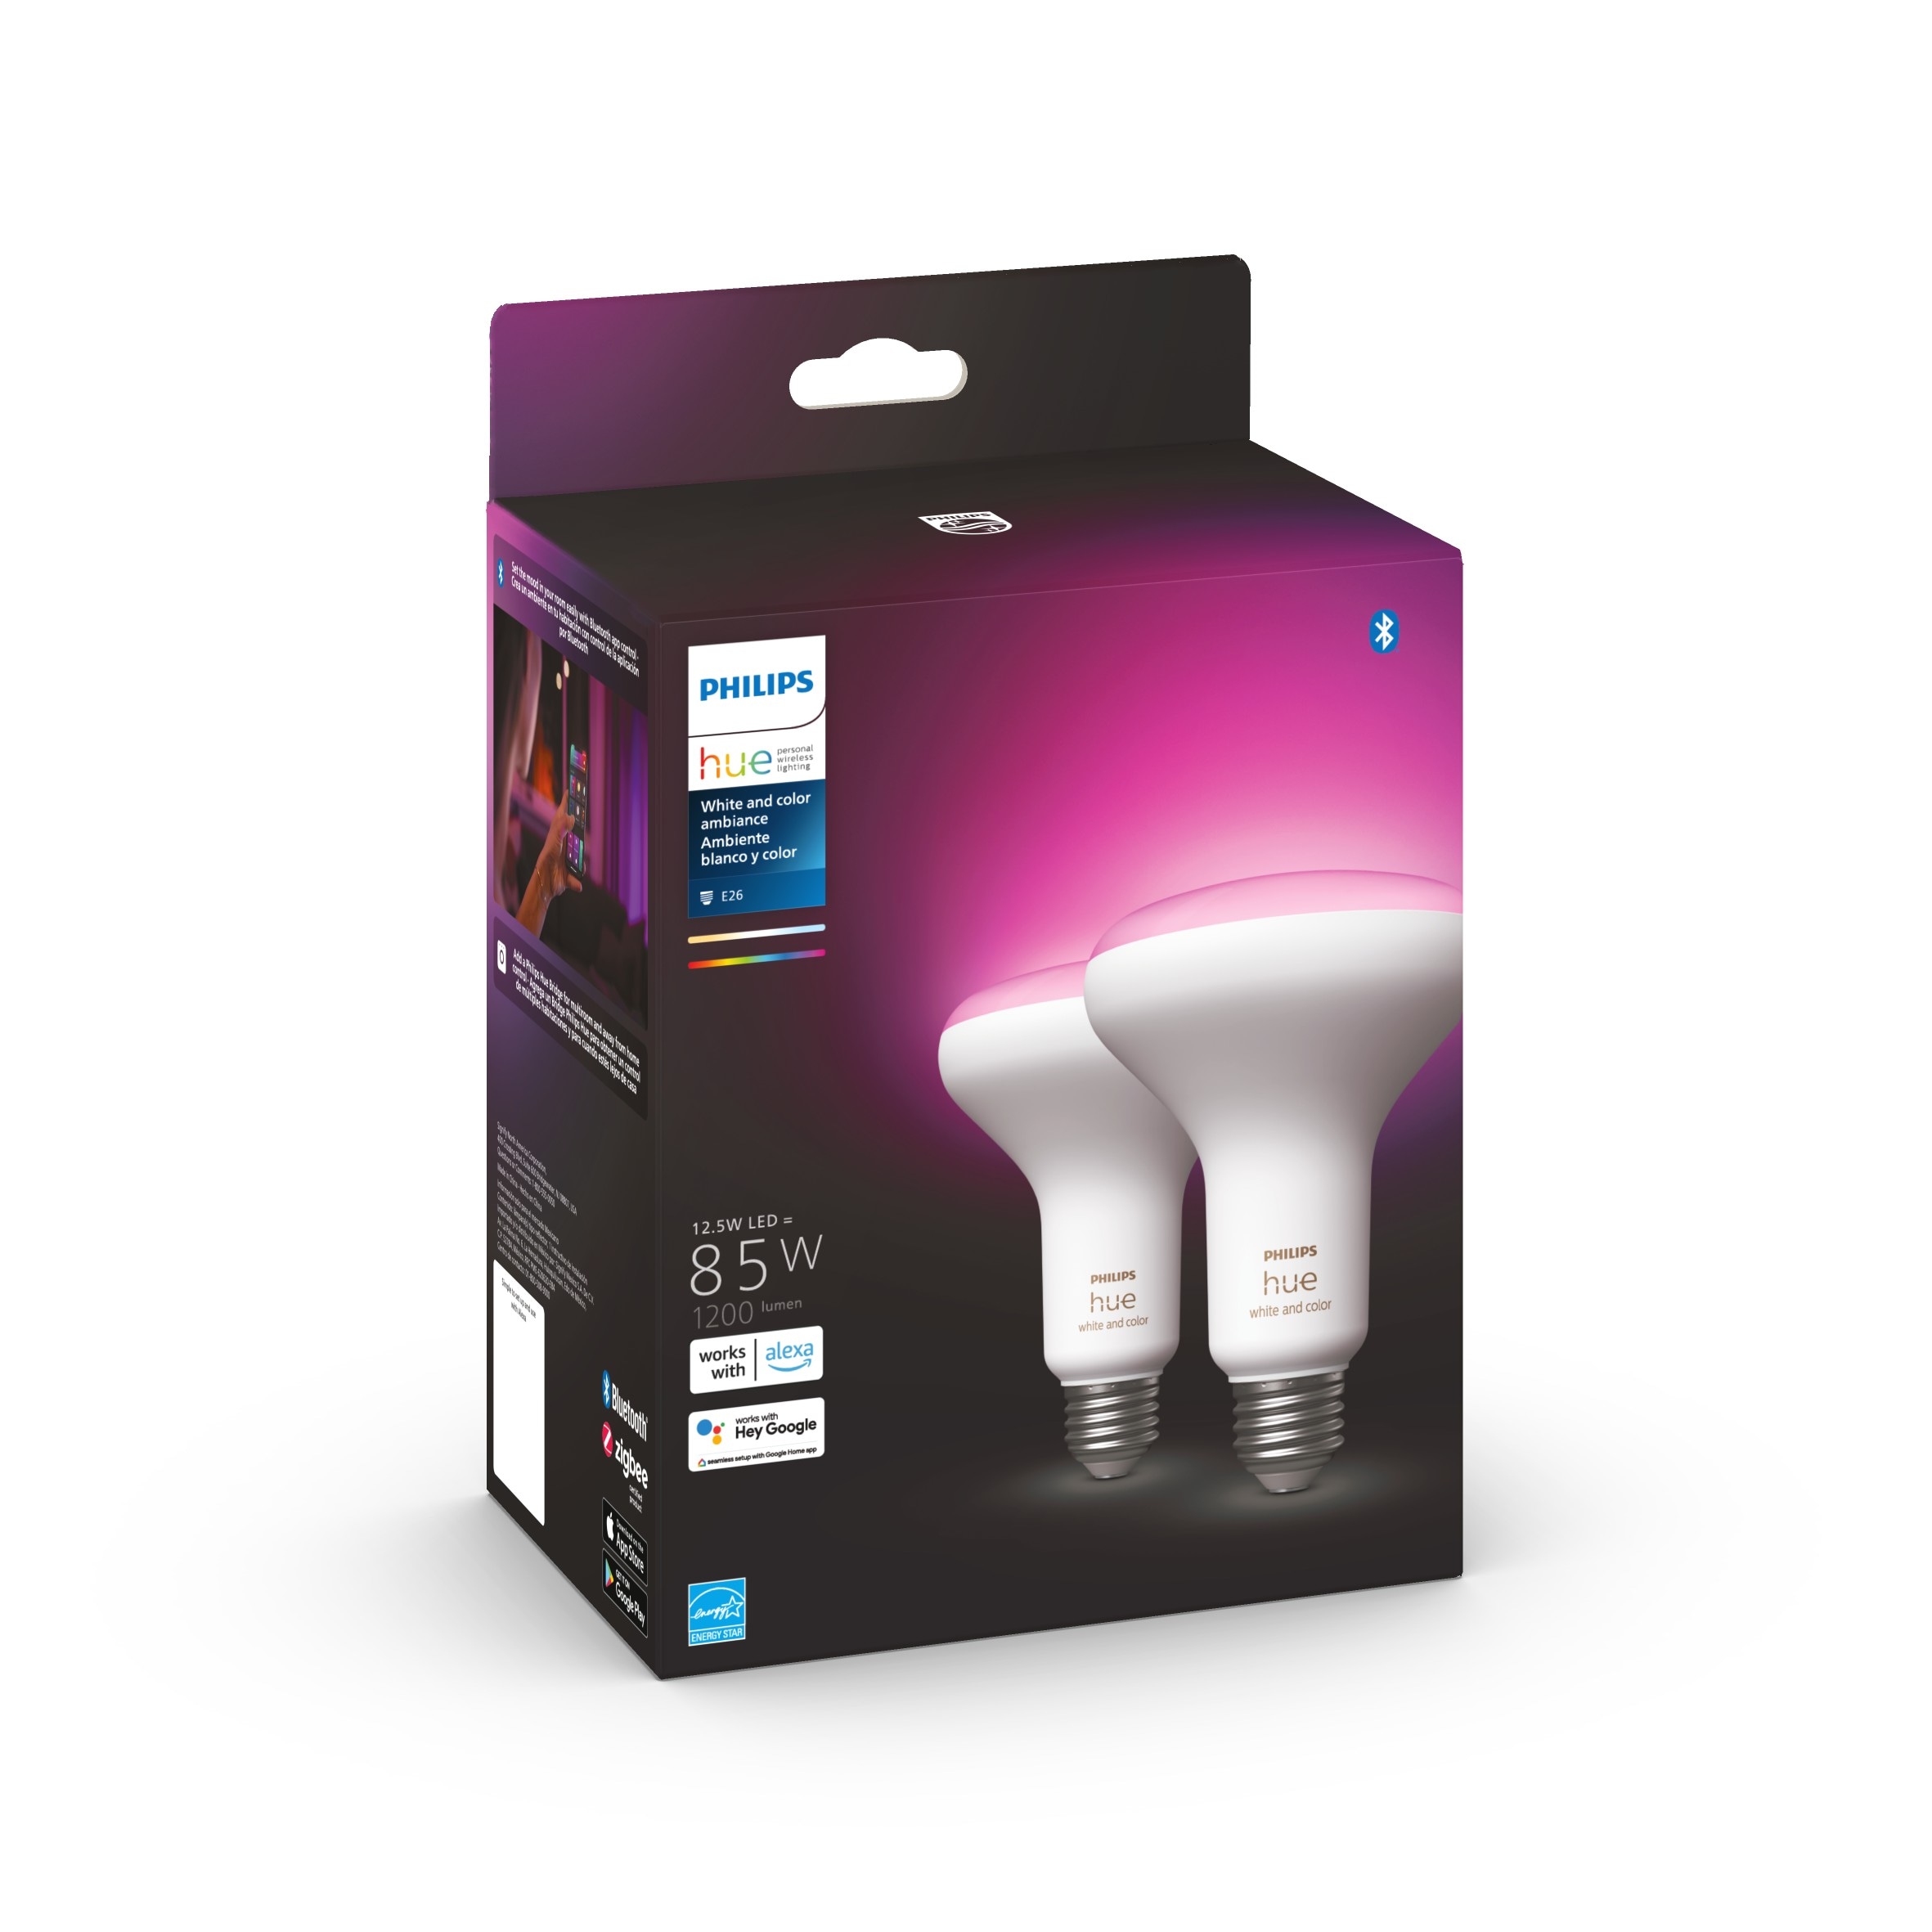 Philips Hue BR30 Color-changing E26 Dimmable Smart LED Light Bulb